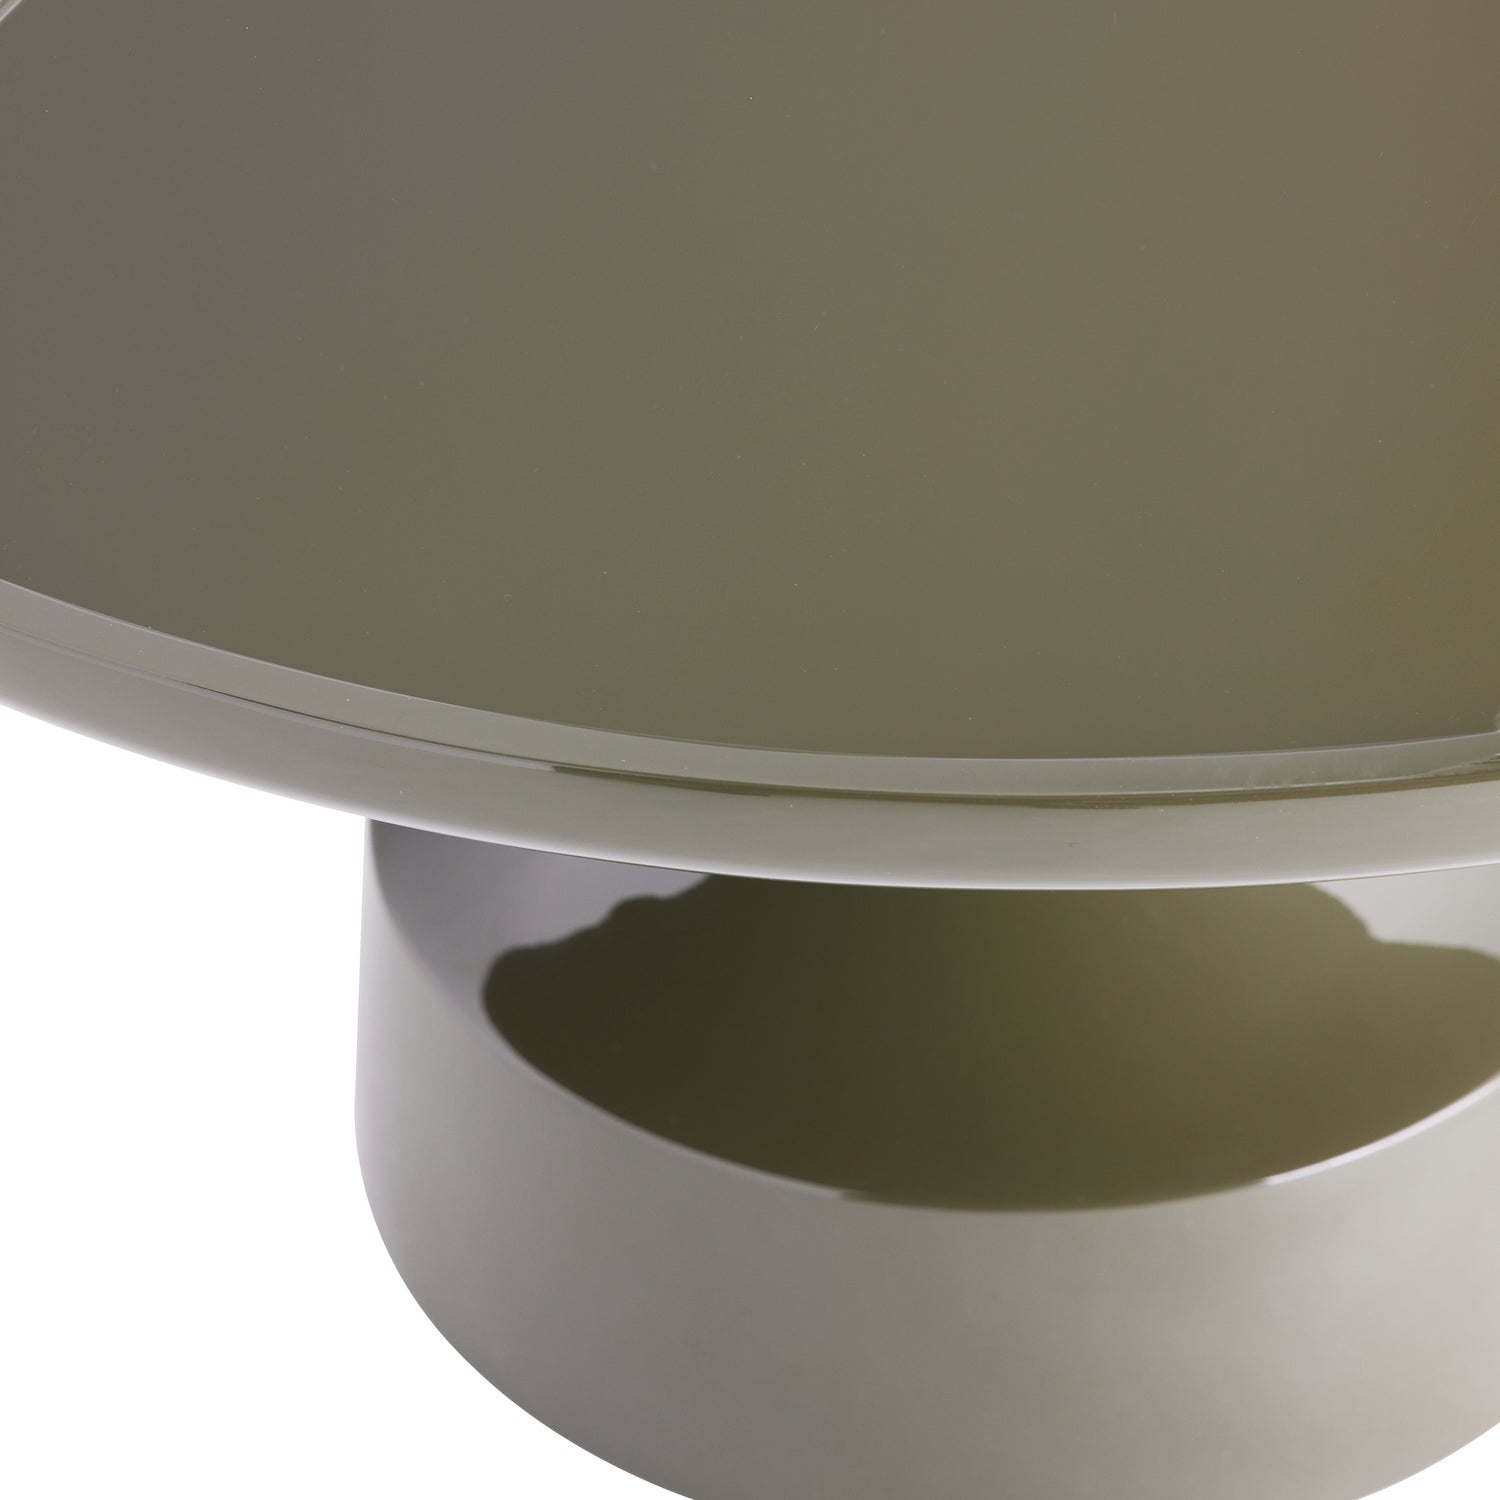 Cocktail Table from the Joelie collection in Dark Moss finish